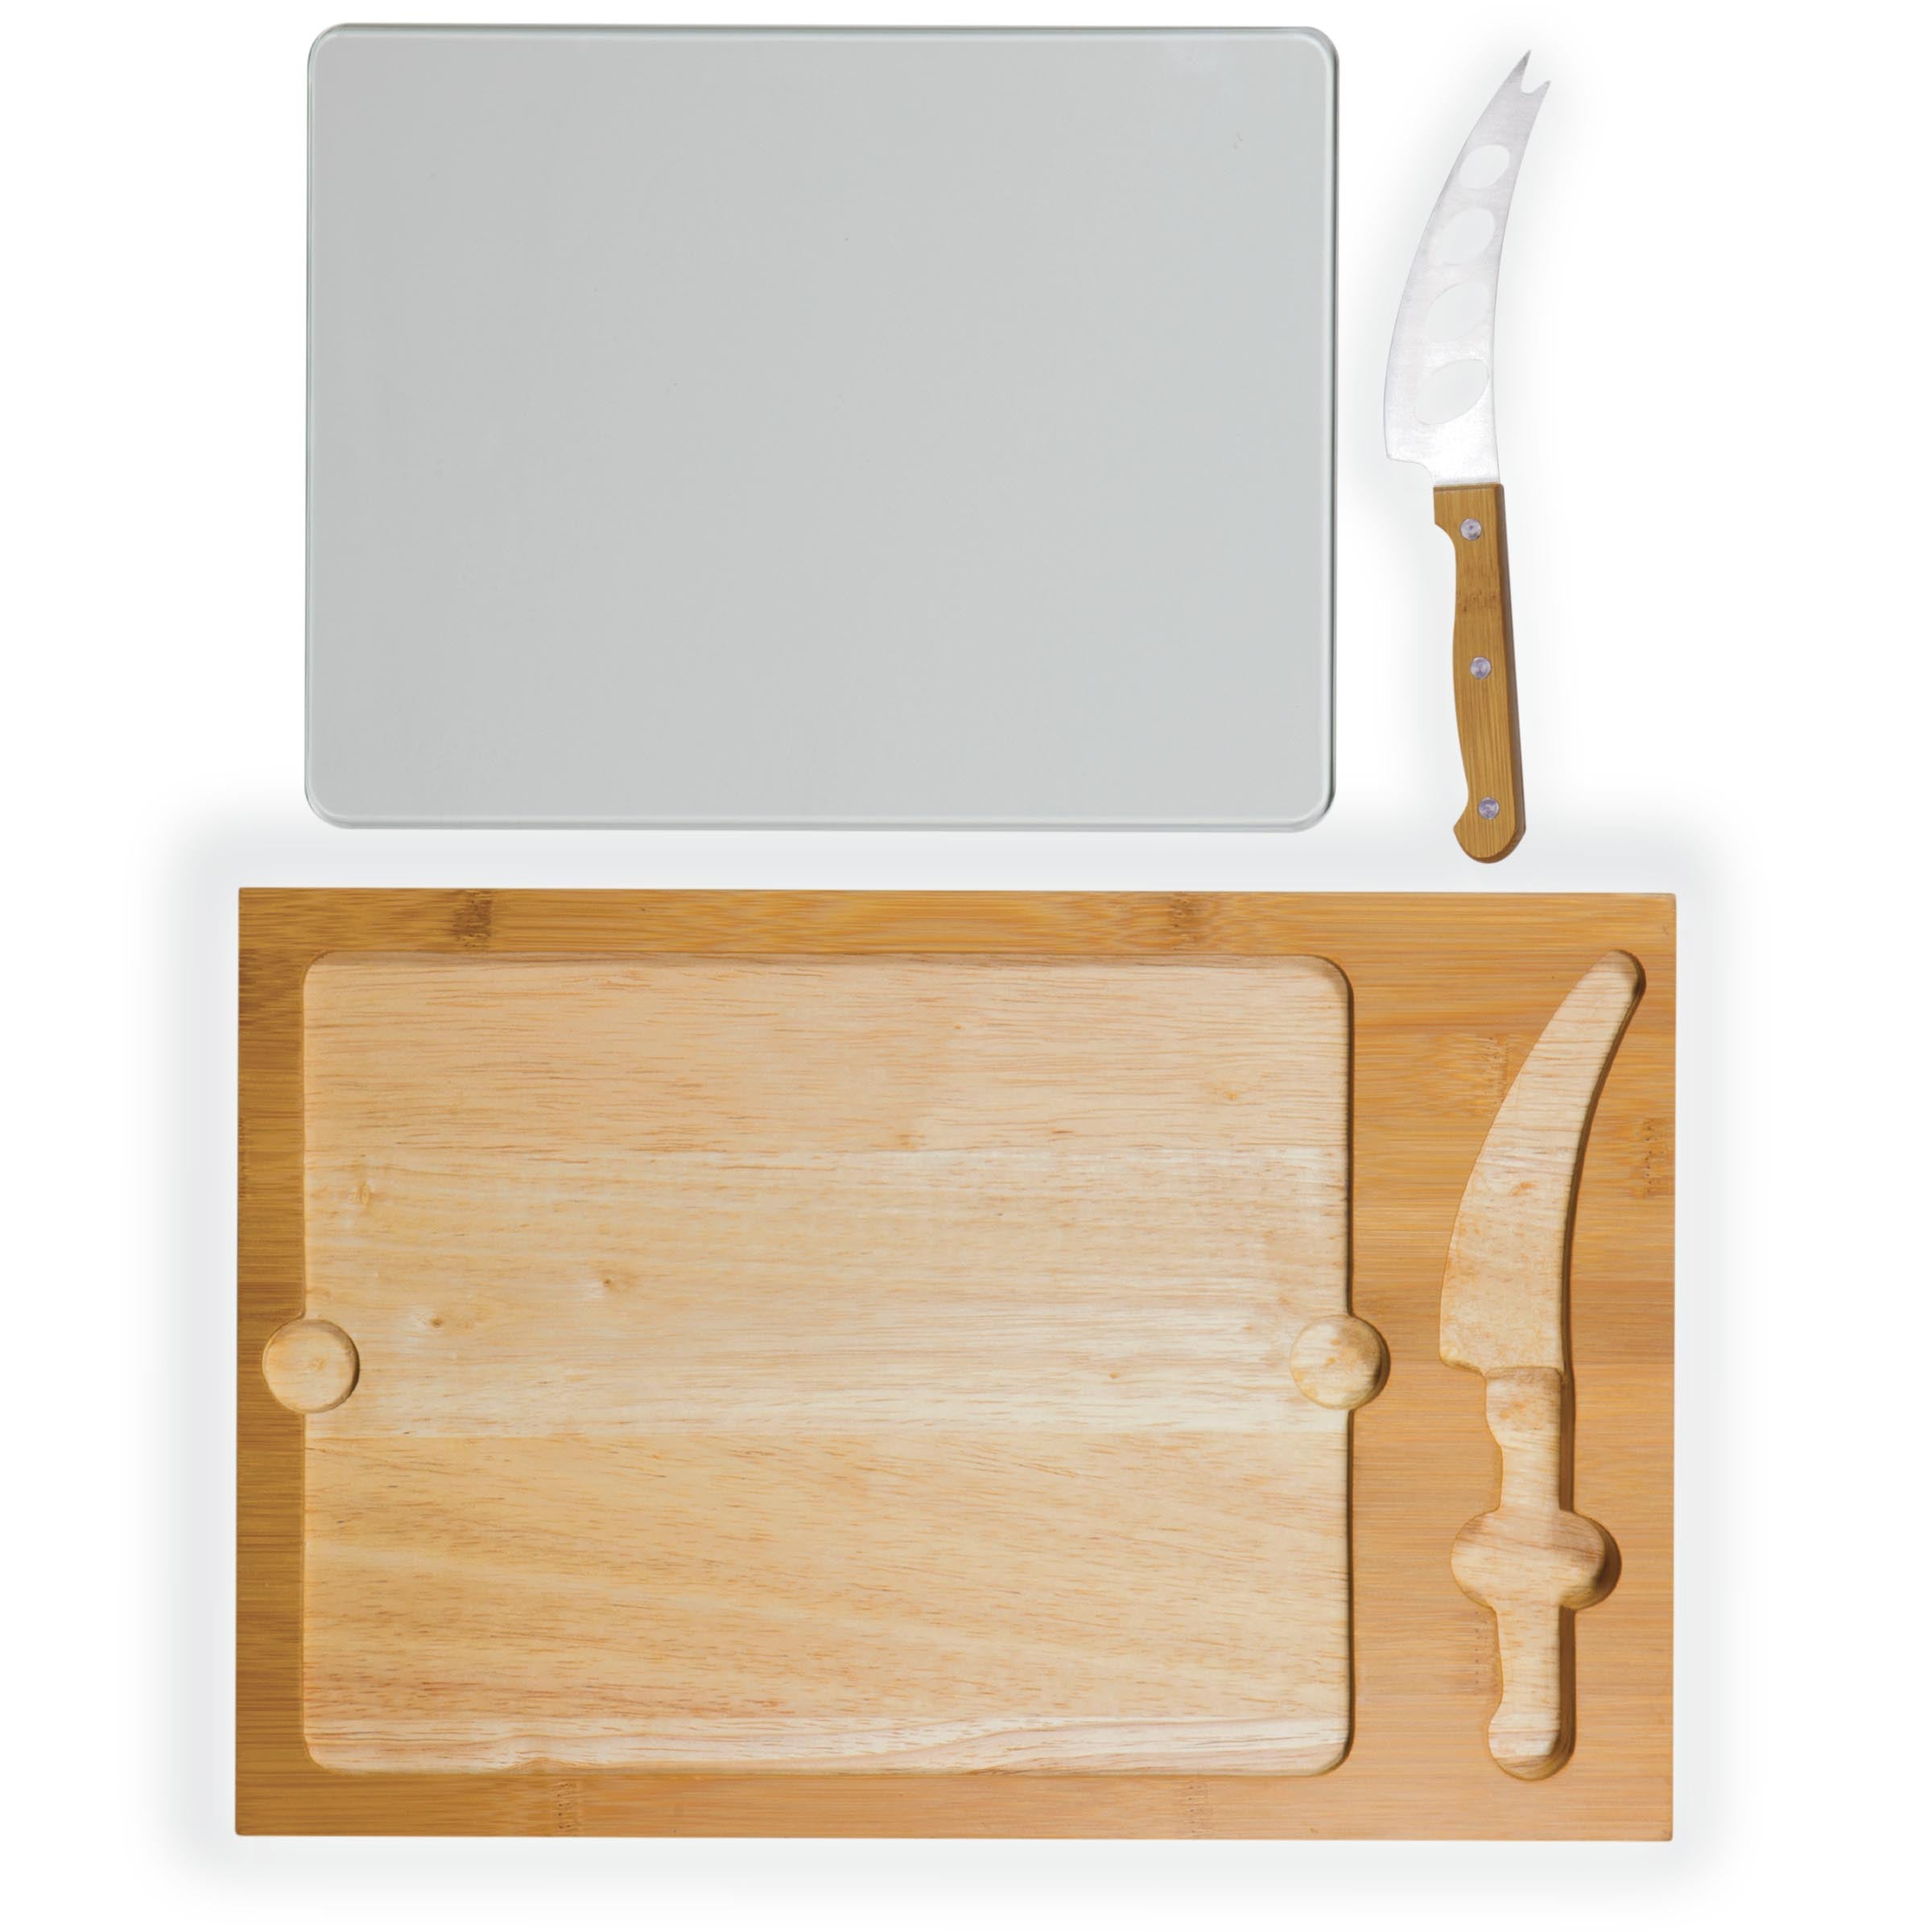 Vogue Wooden Universal Knife Block and Chopping Board